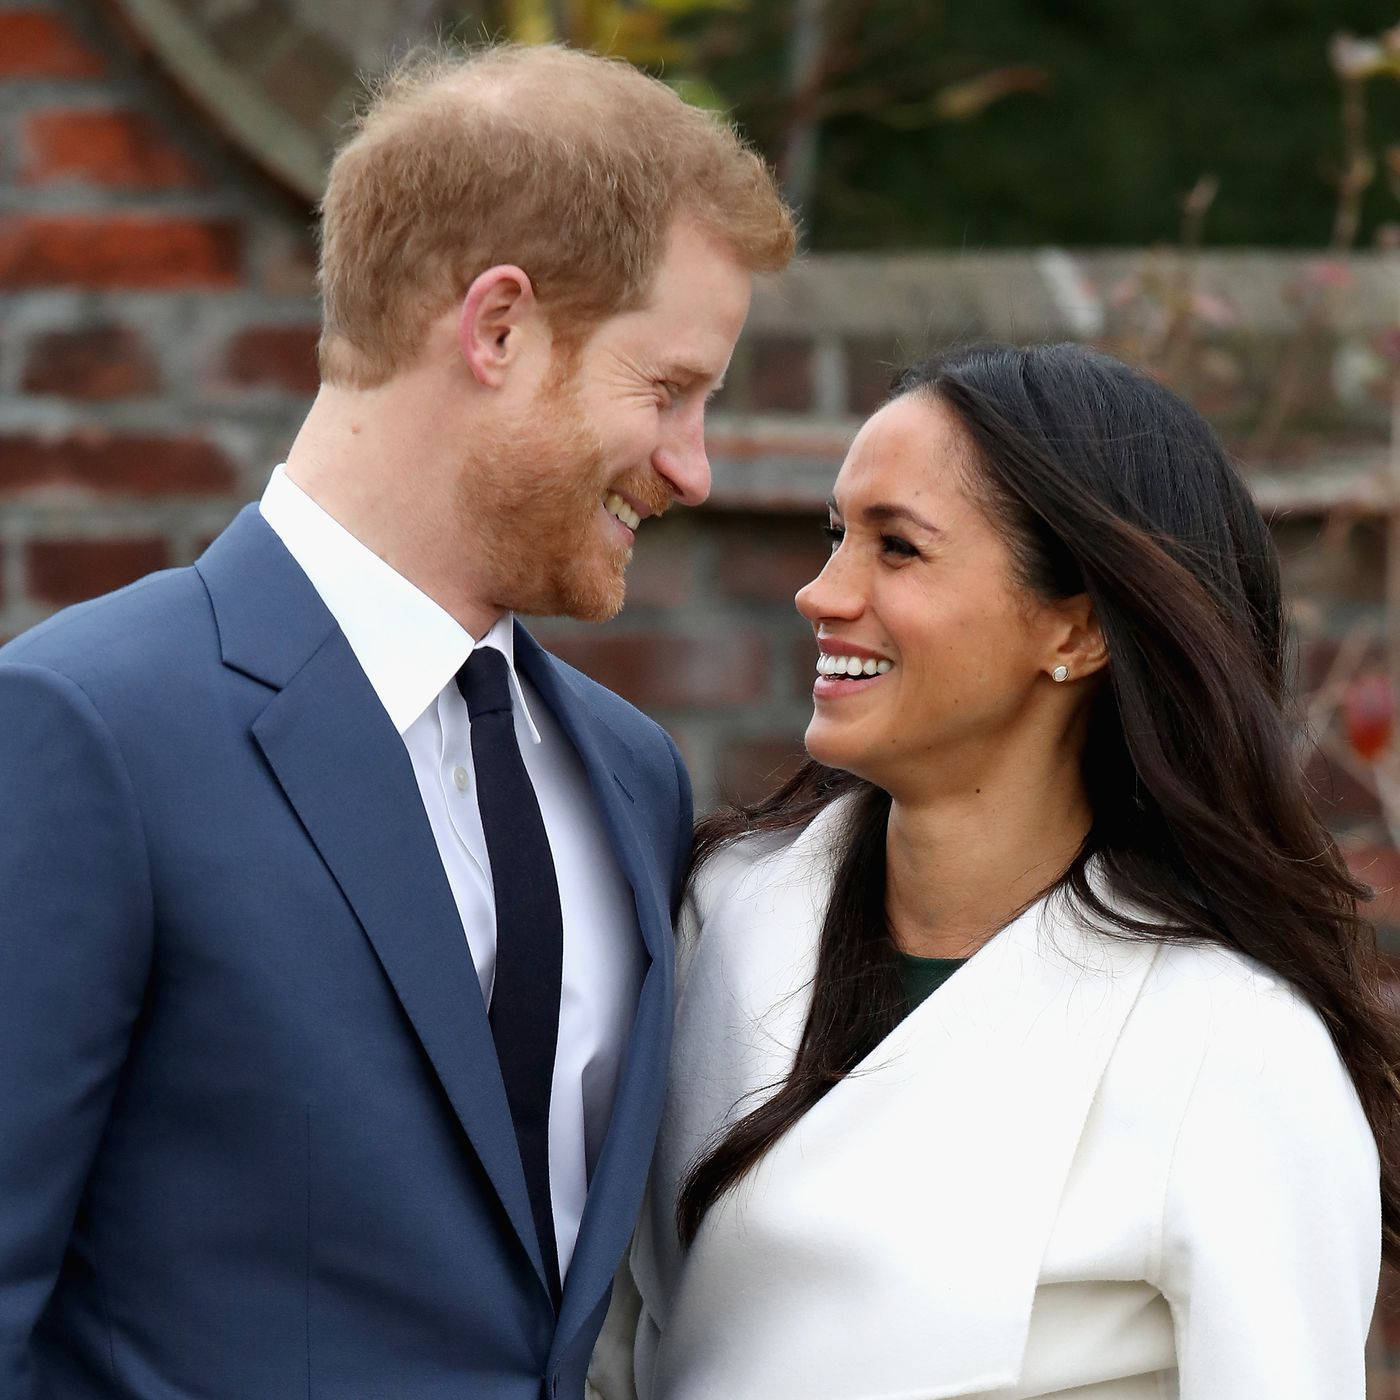 Prince Harry and Meghan Markle's Endearing Glance Wallpaper